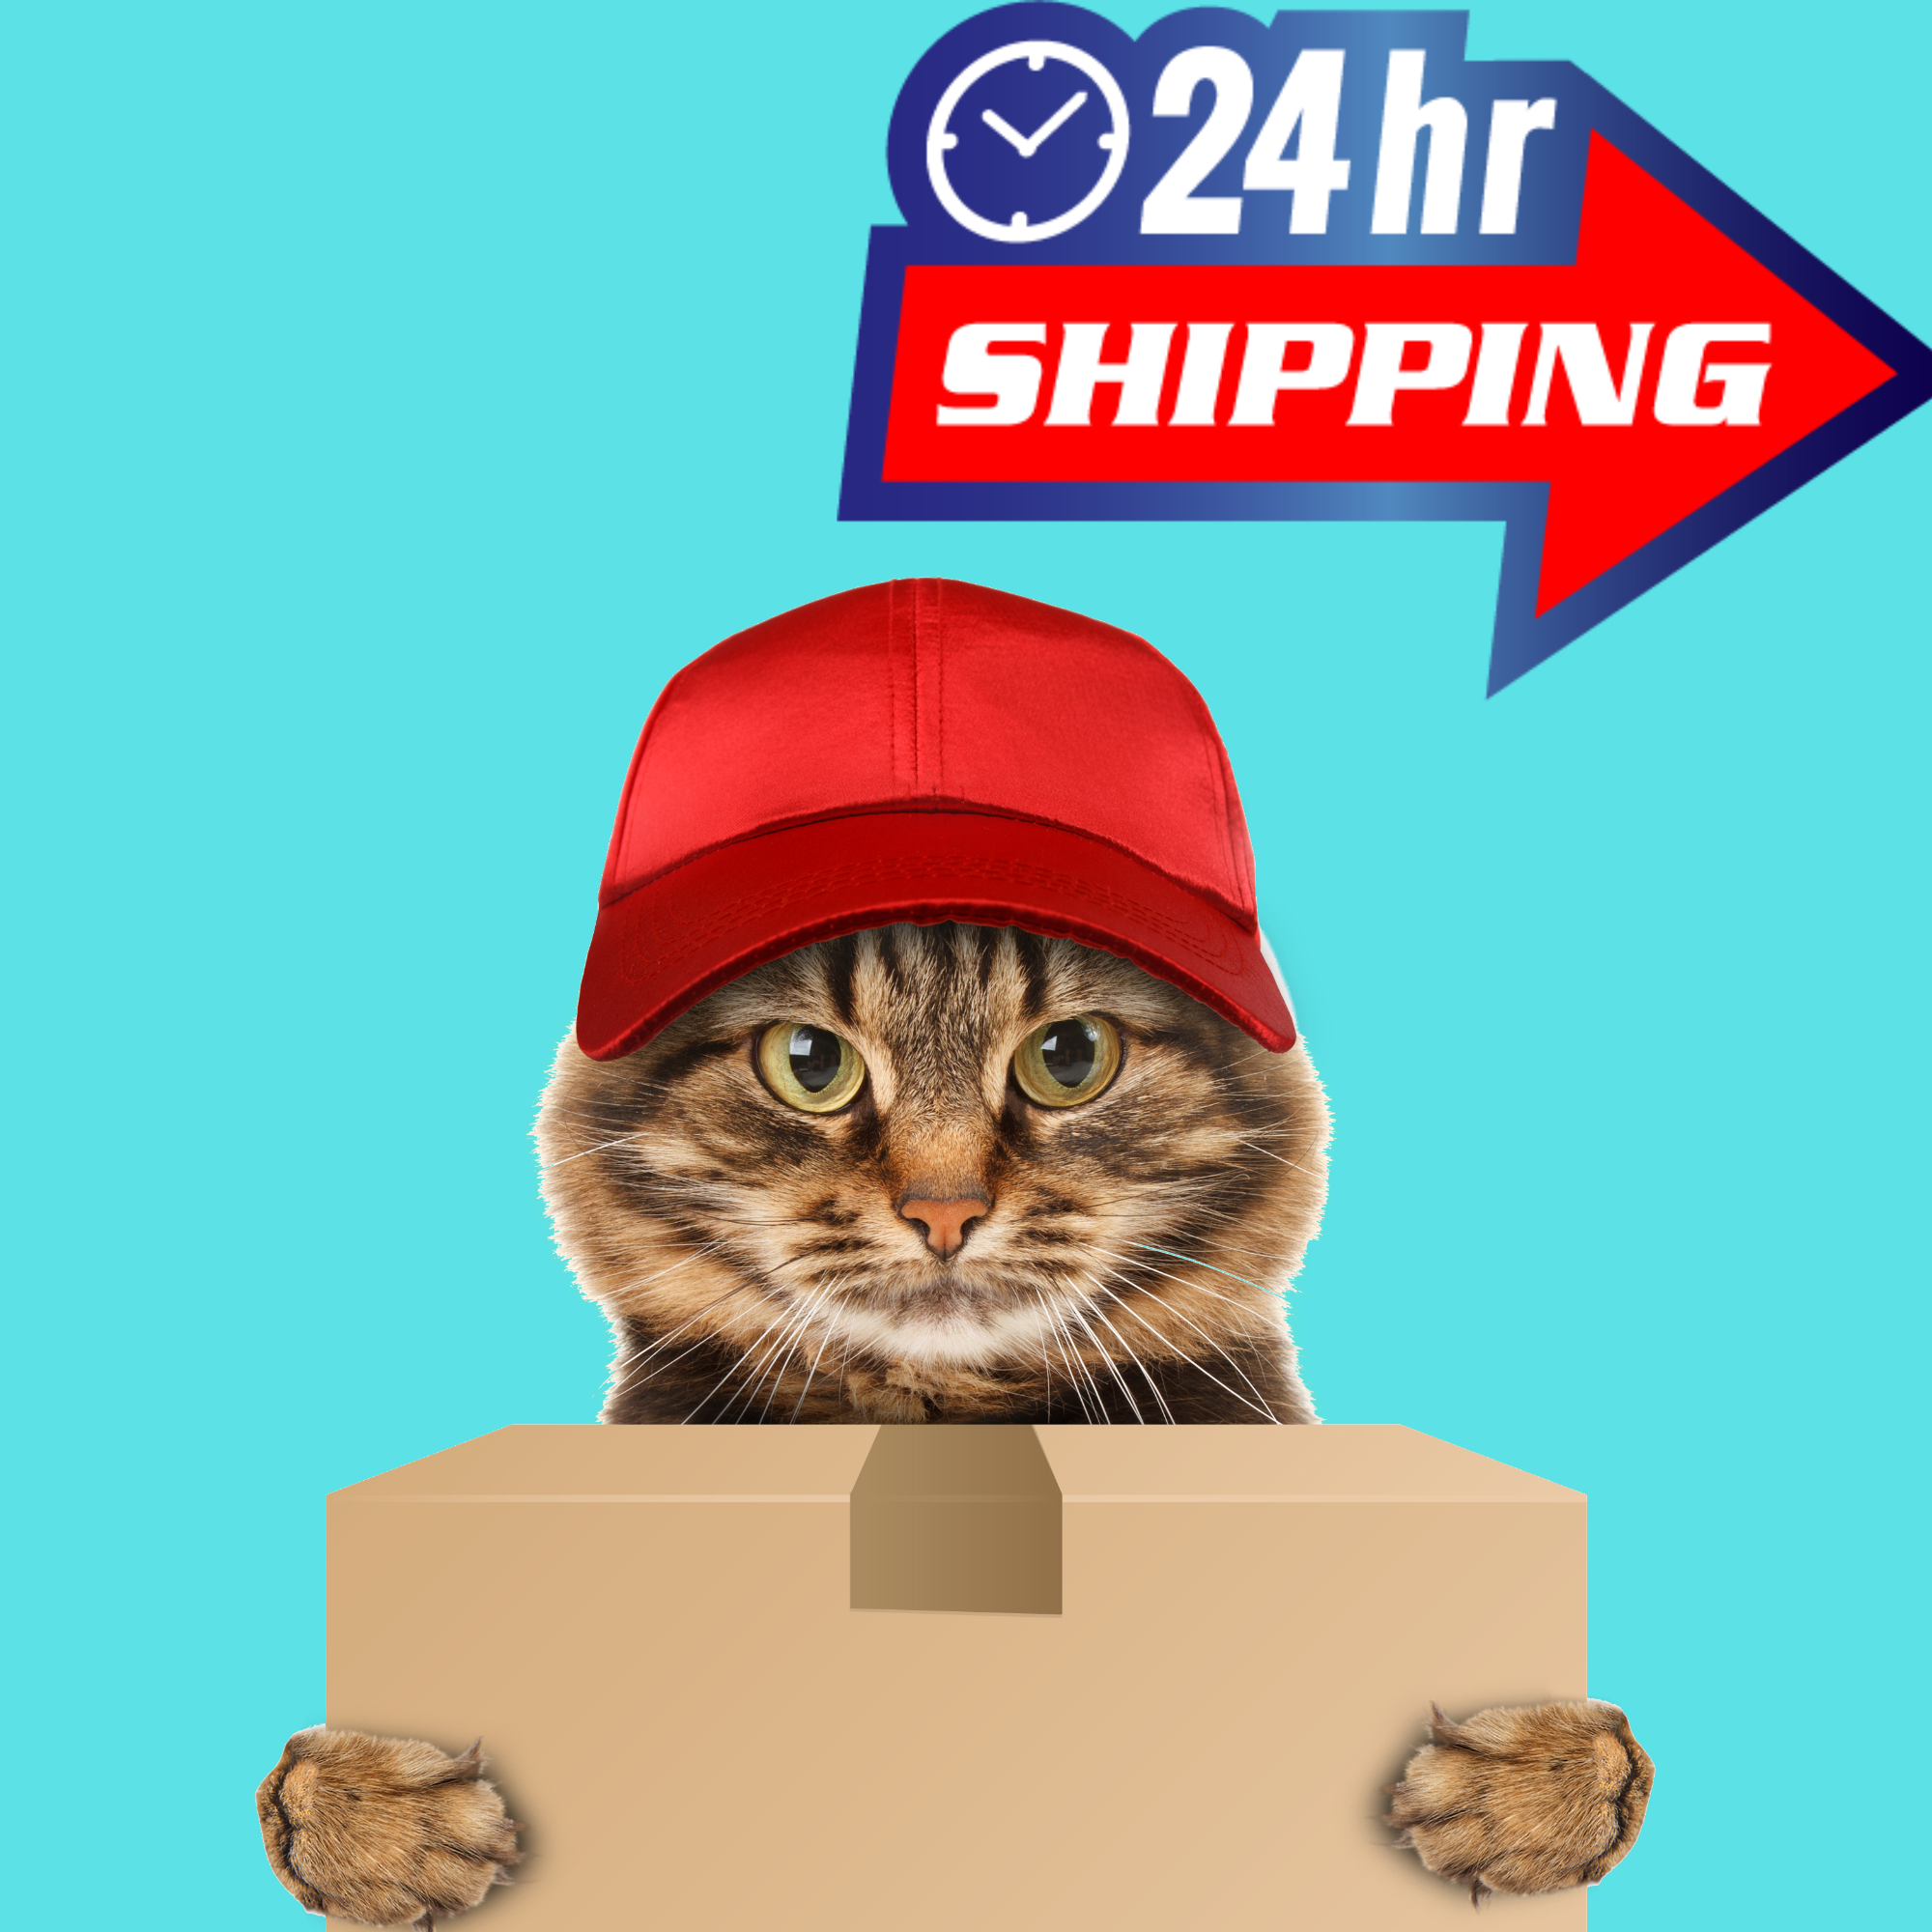 Shop Cat Lover Gifts That Ship in 24 Hours